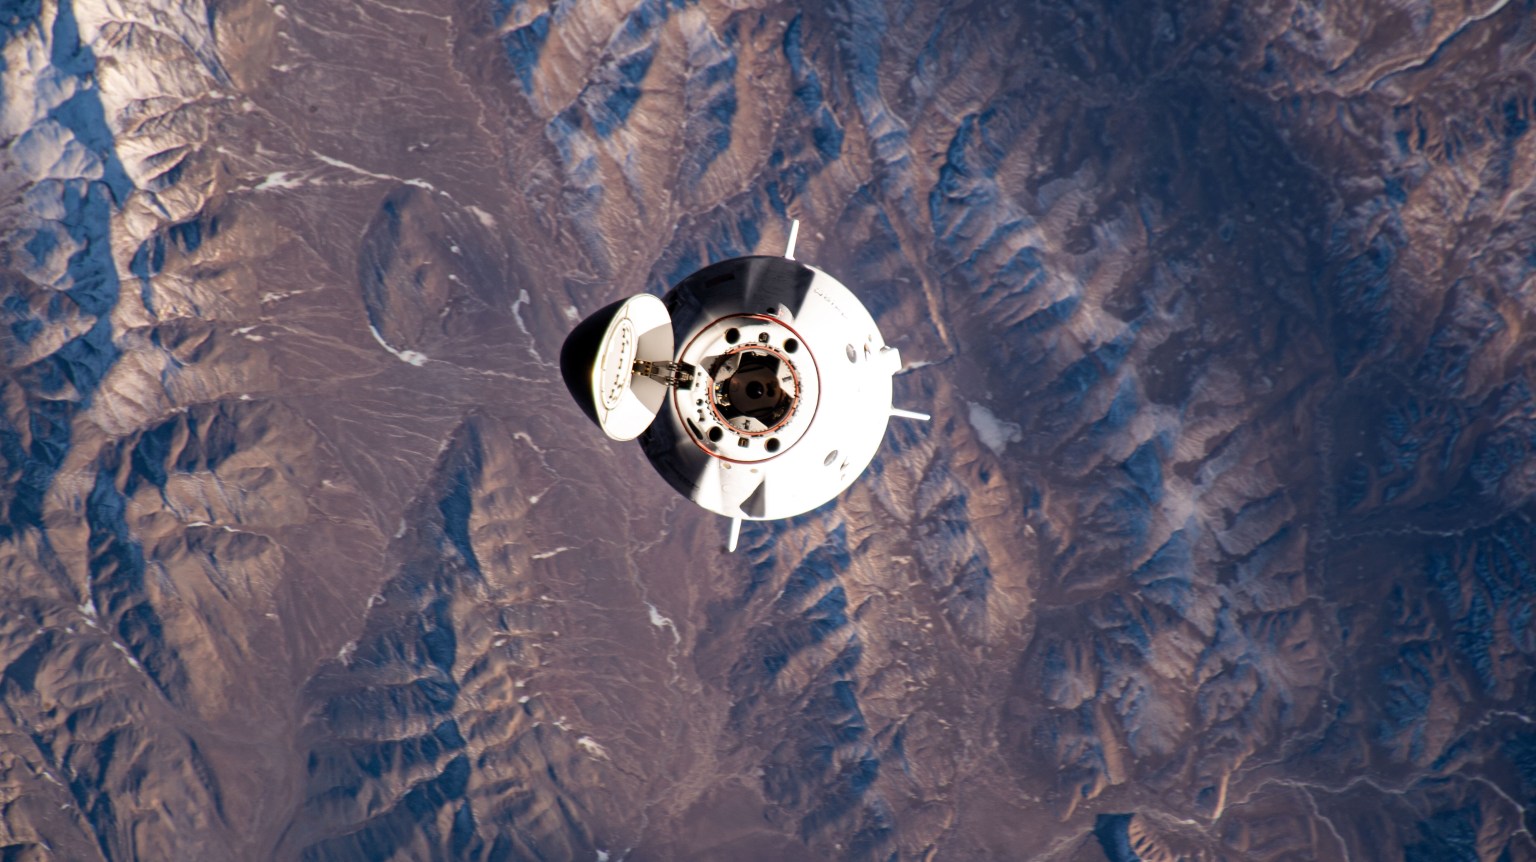 The SpaceX Dragon Freedom spacecraft carrying the four-member Axiom Mission 3 (Ax-3) crew is pictured approaching the International Space Station 260 miles above China north of the Himalayas.